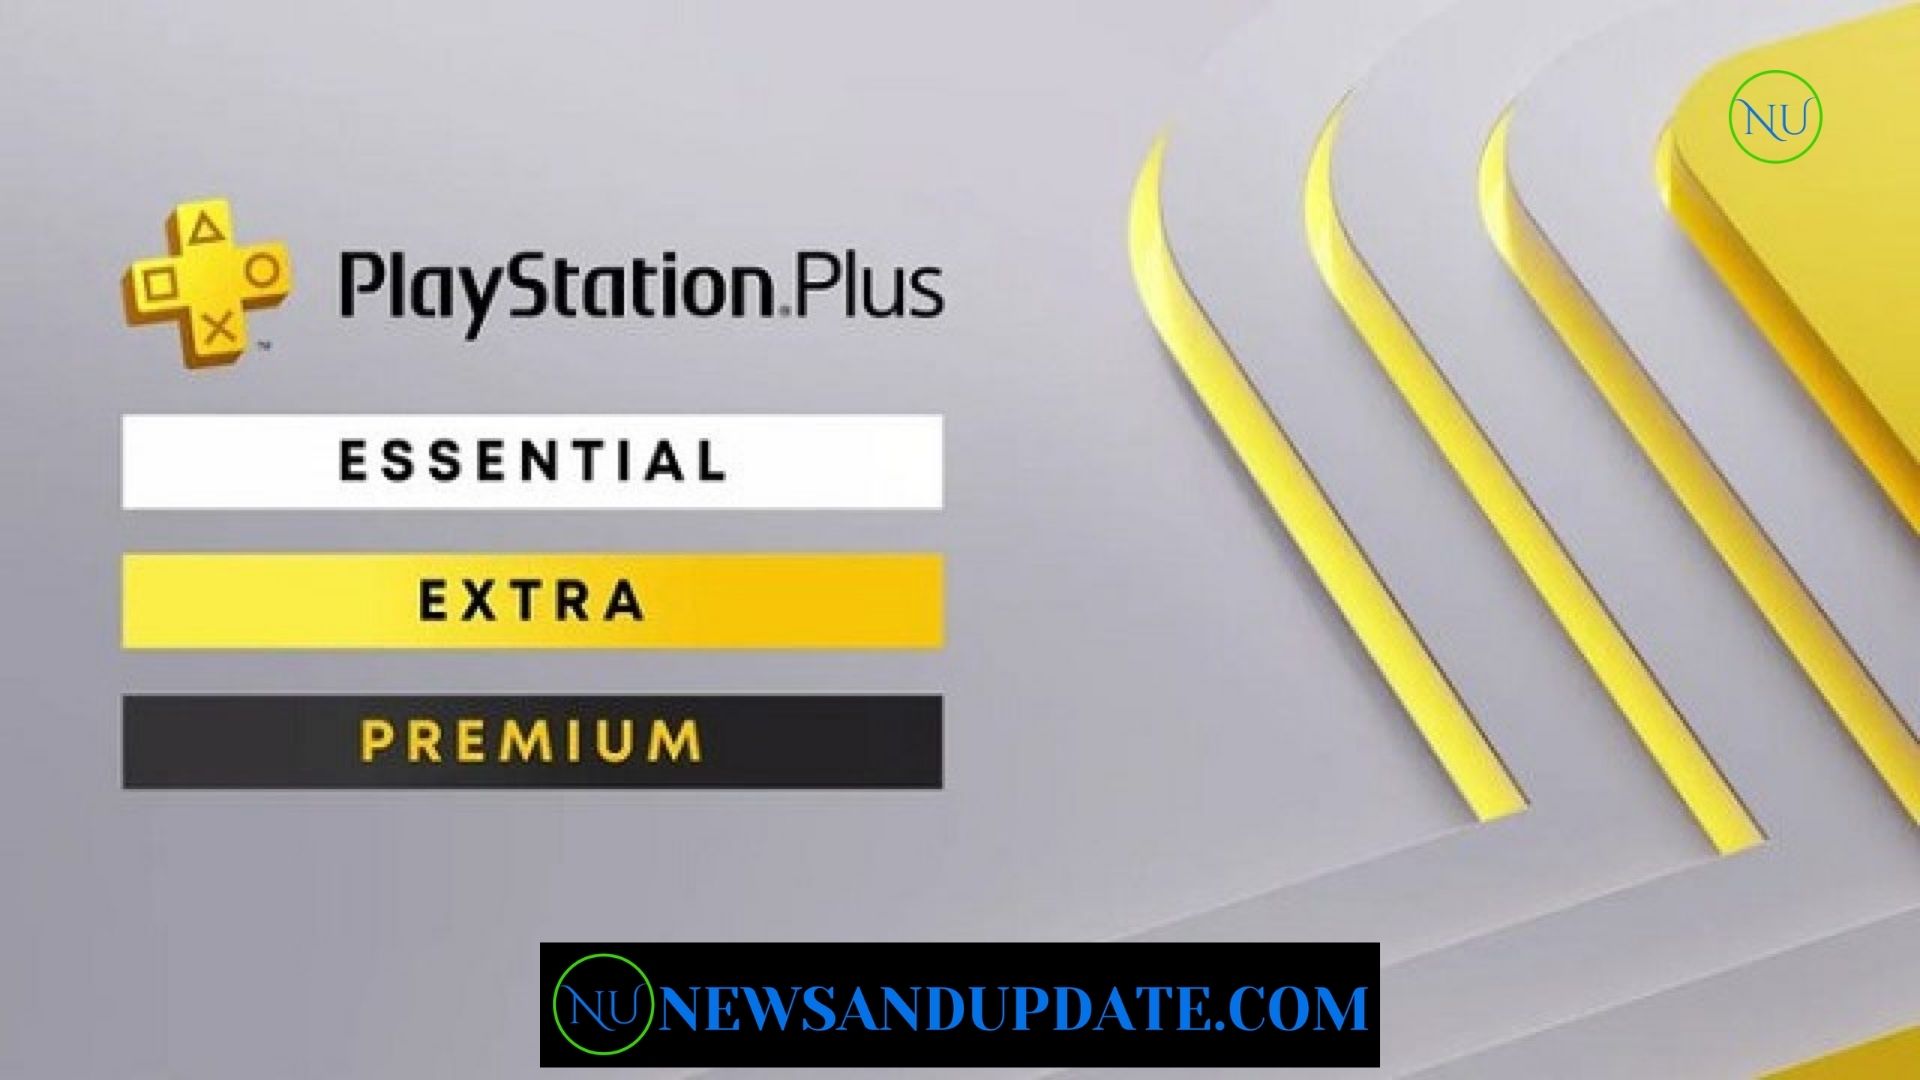 PS Plus Launches In North And South America - Checkout The Games Included With PlayStation Plus Extra And Premium